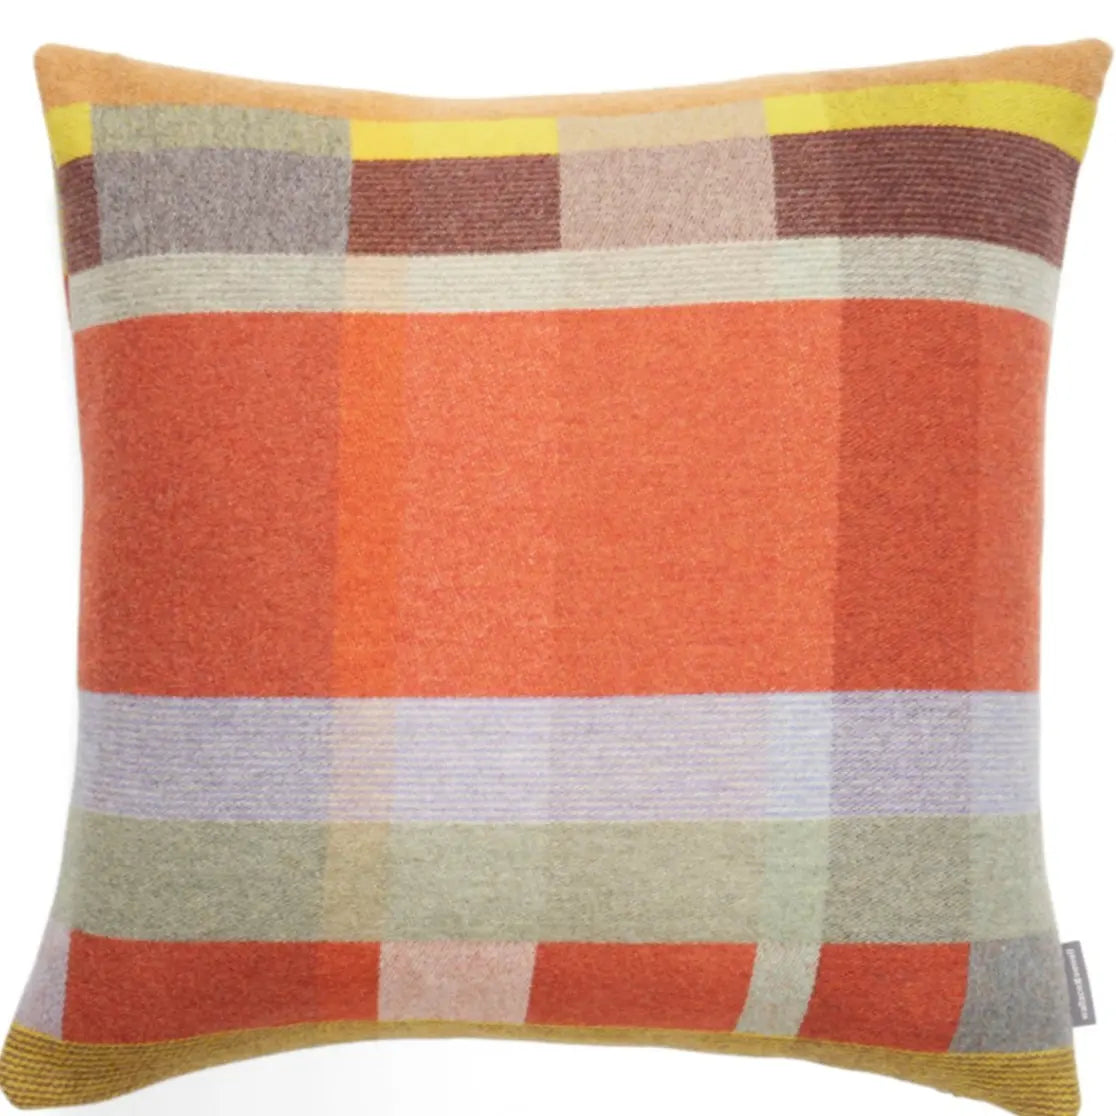 Wallace and Sewell-Cecil Cushion Wallace & Sewell